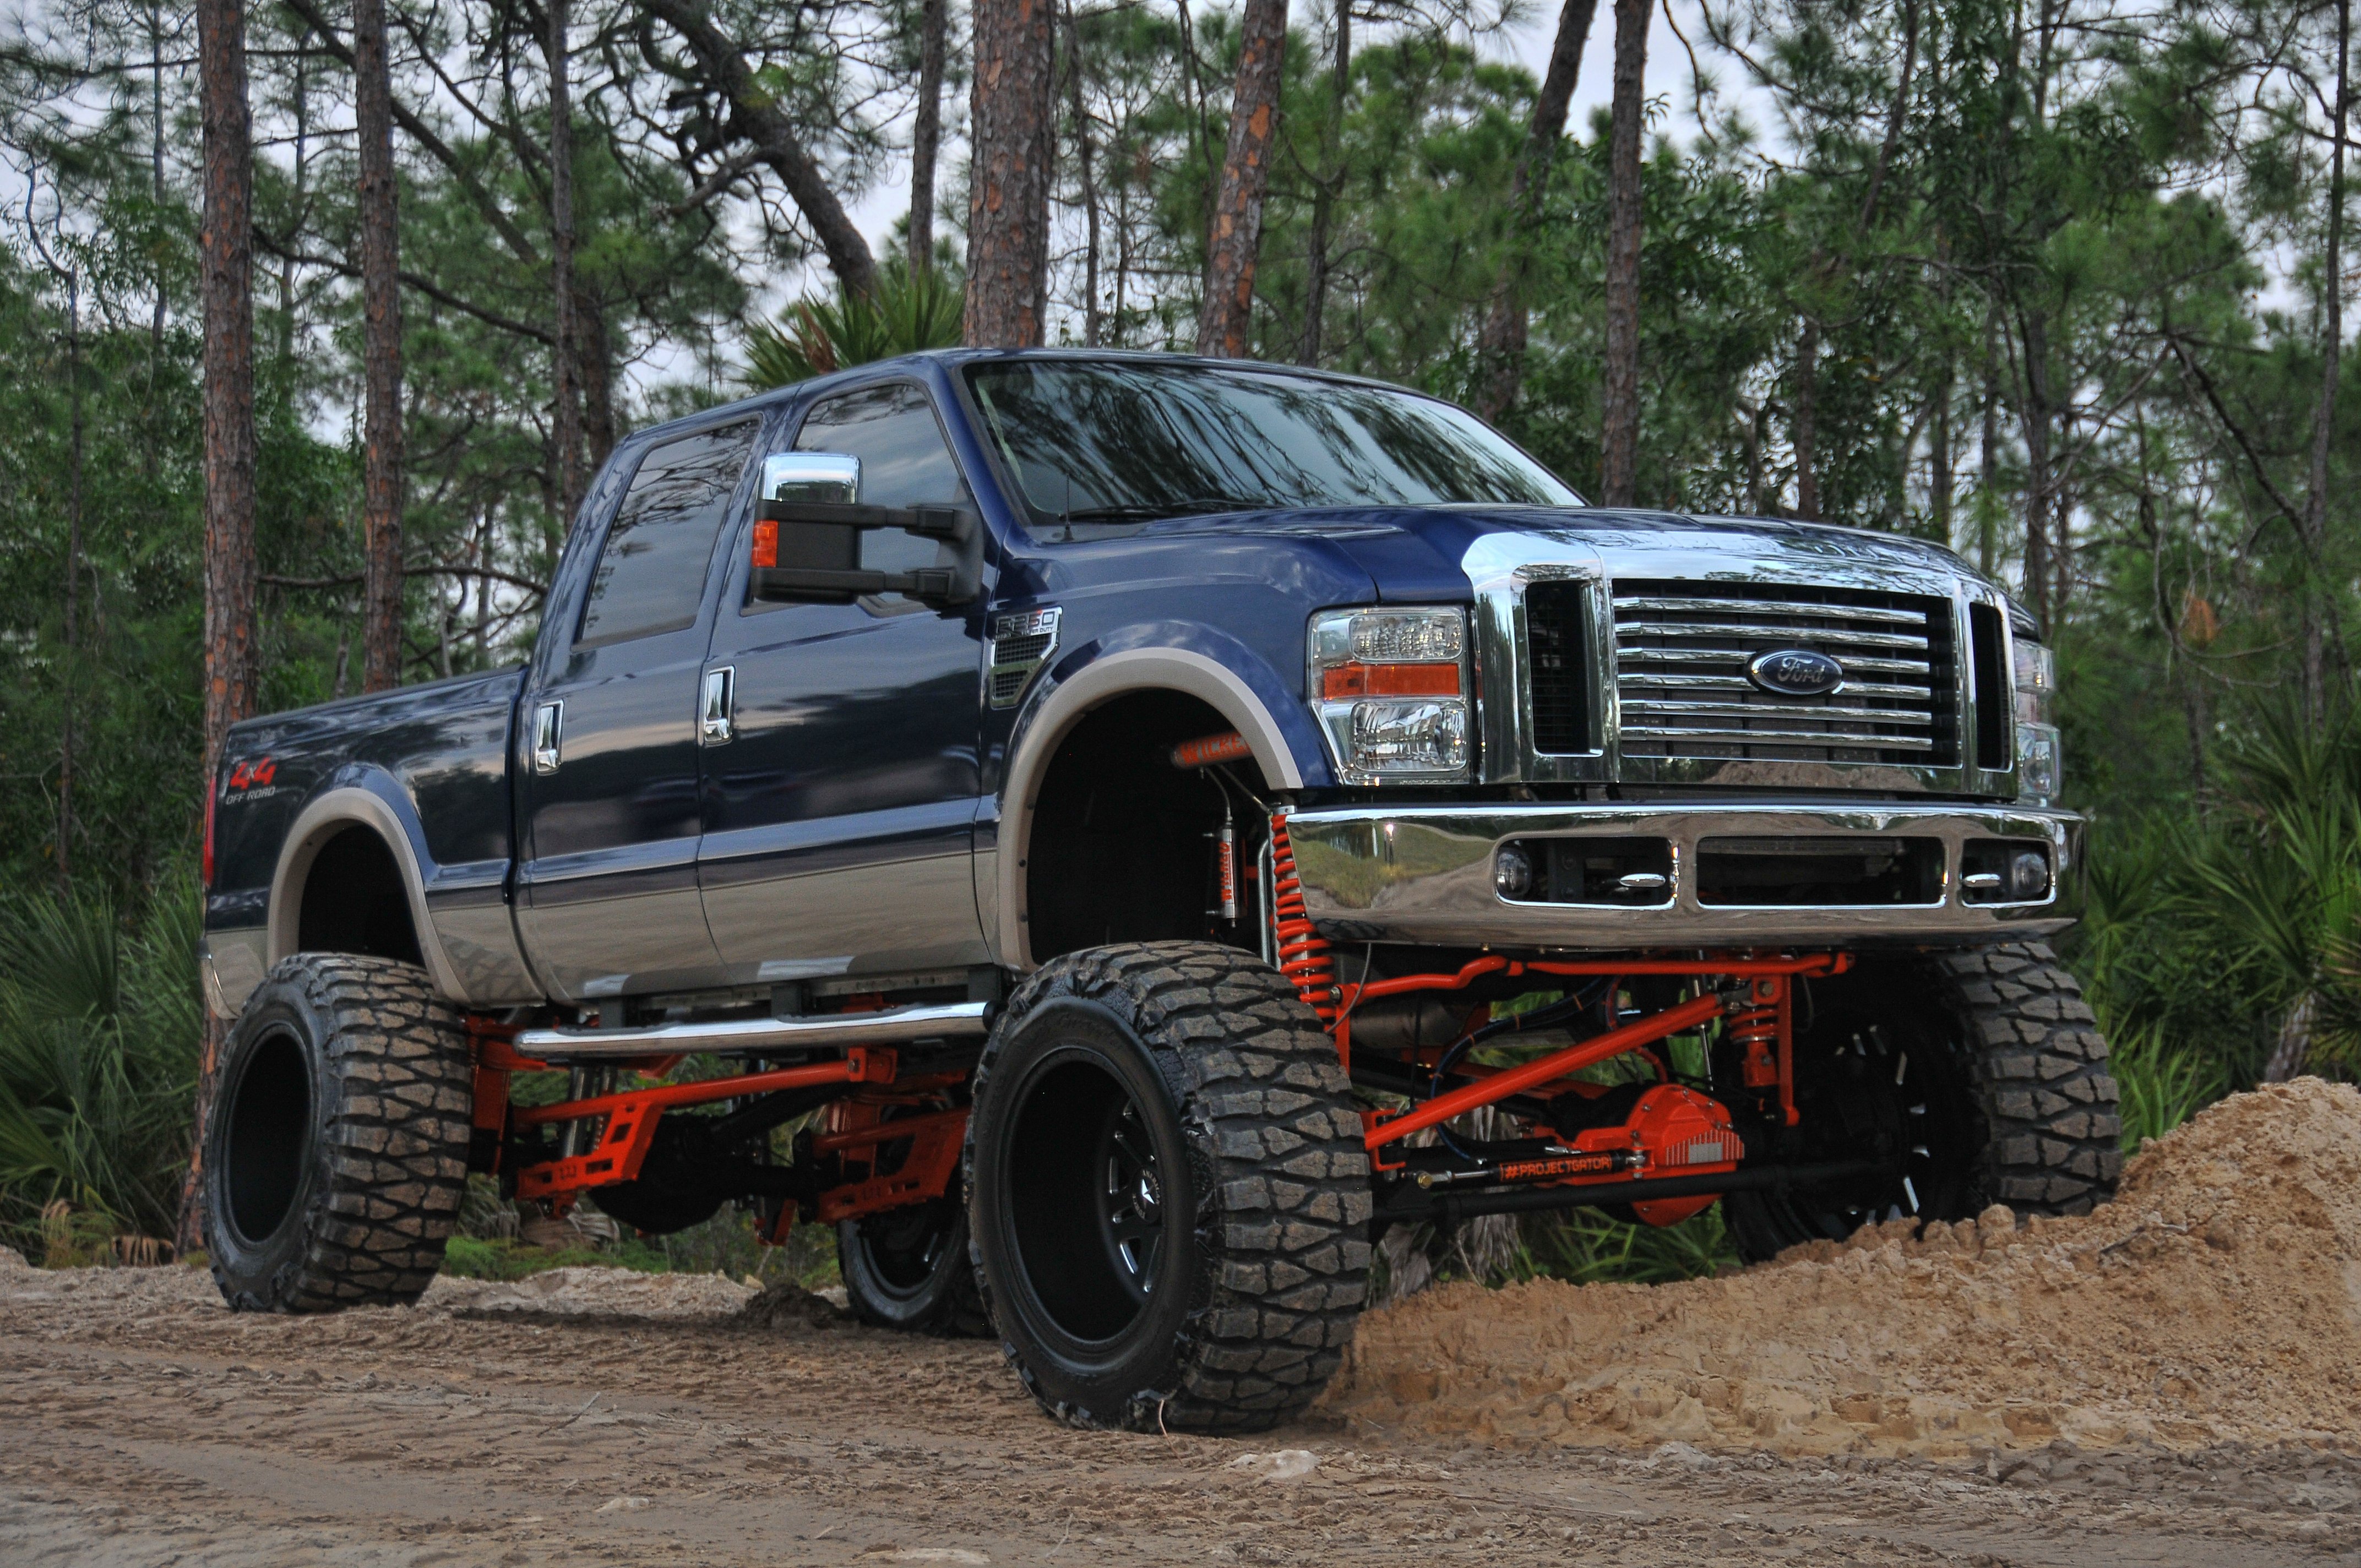 american, Forcewheels, Ford, F250, Super, Single, By, Wicked, Performance, On, American, Force, Wheels, Afw Wallpaper